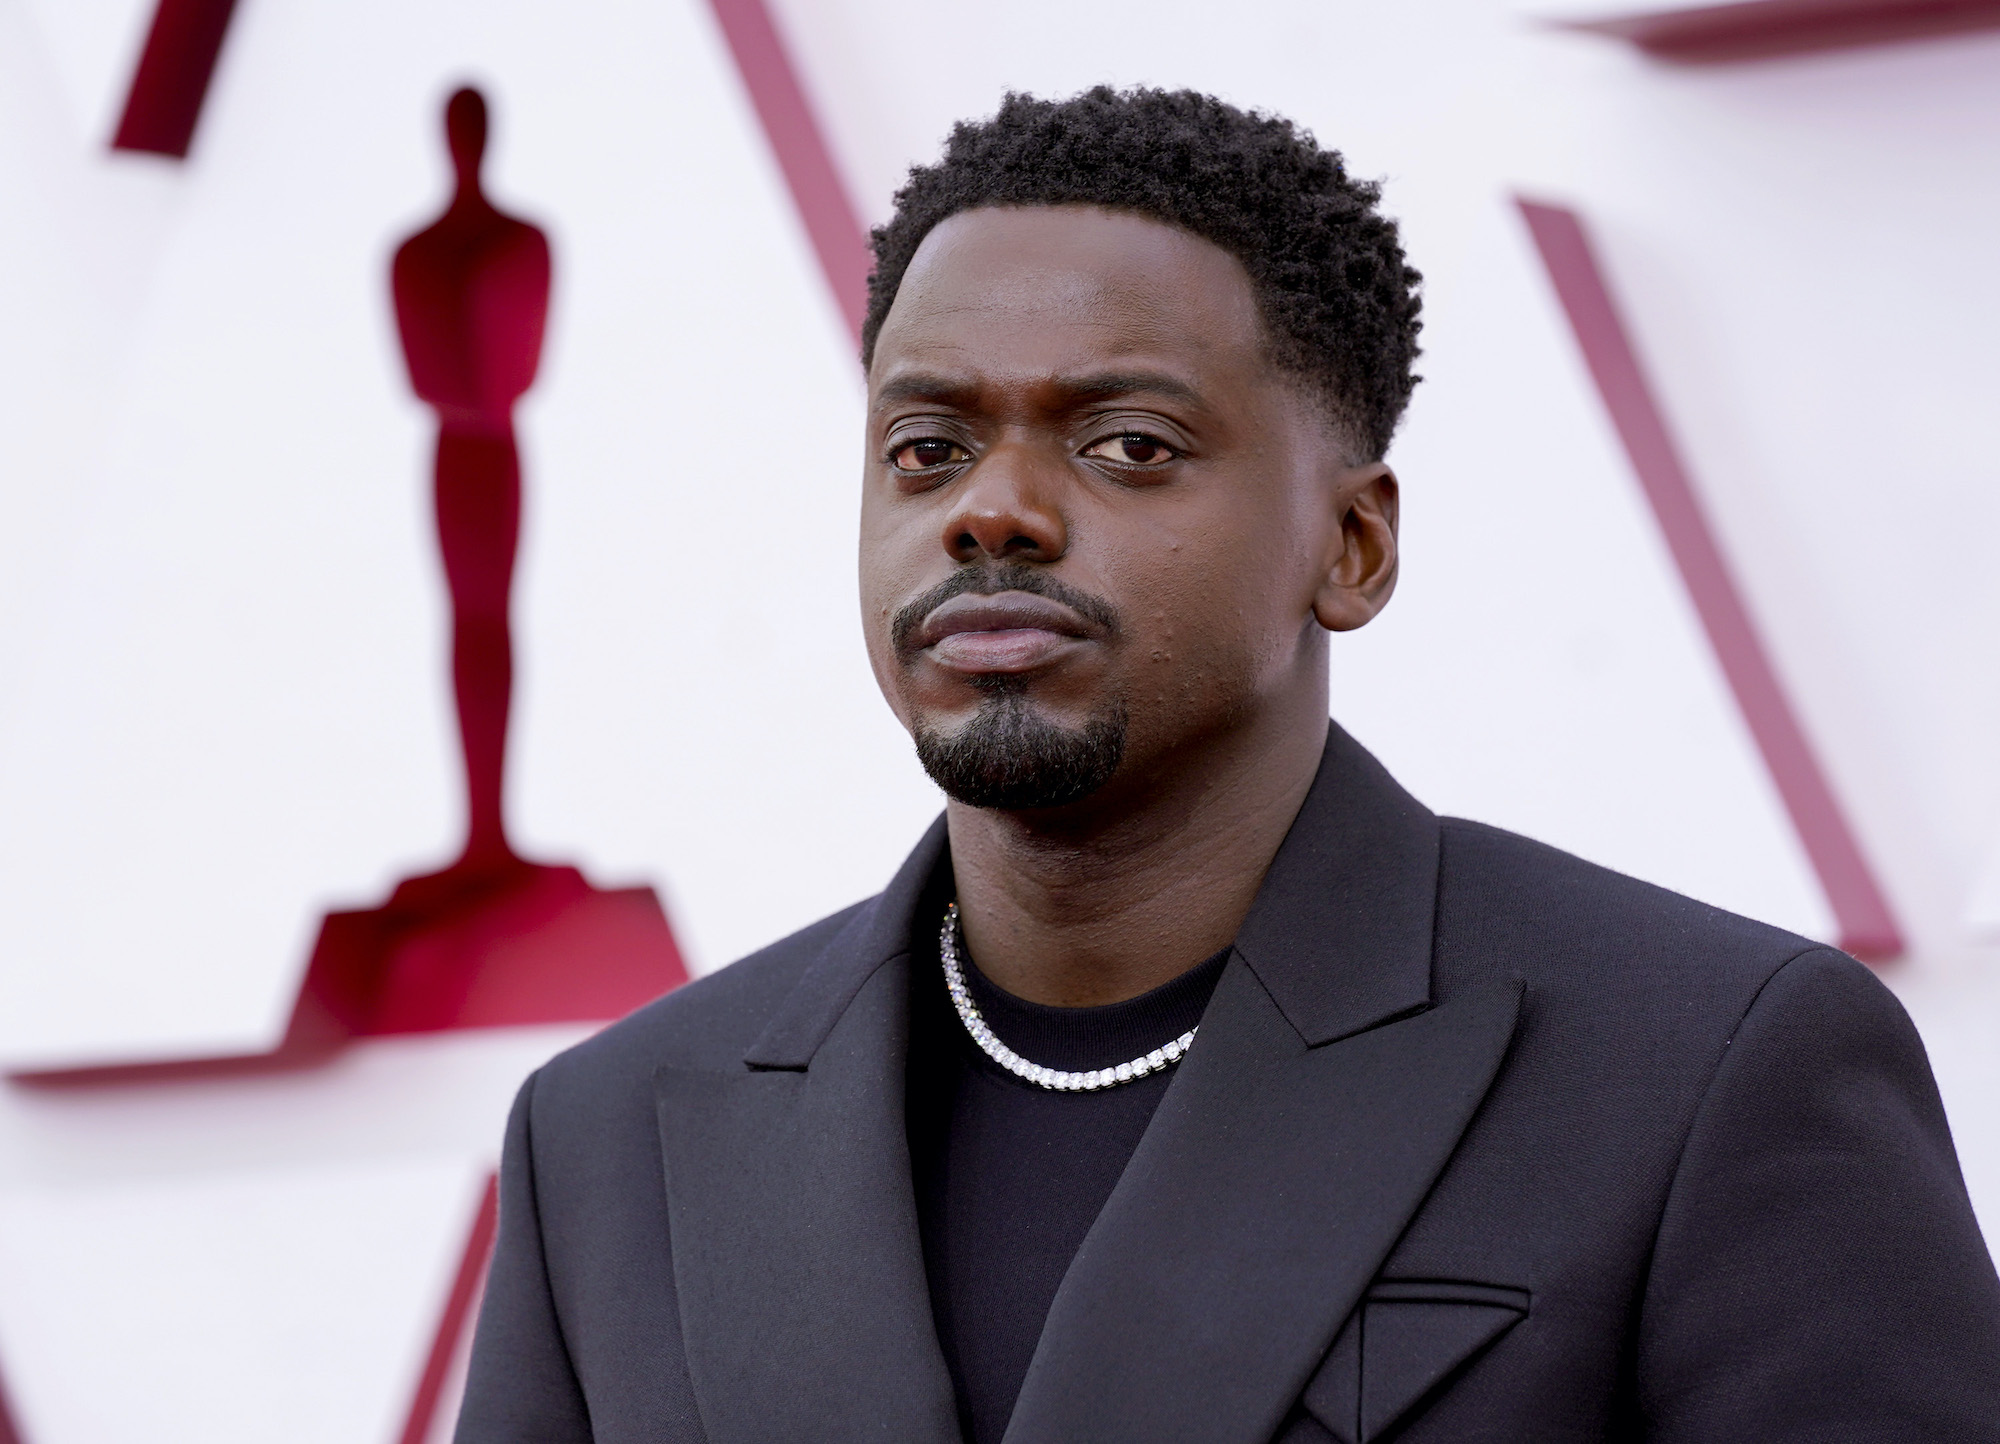 Daniel Kaluuya standing in front of a blurred background